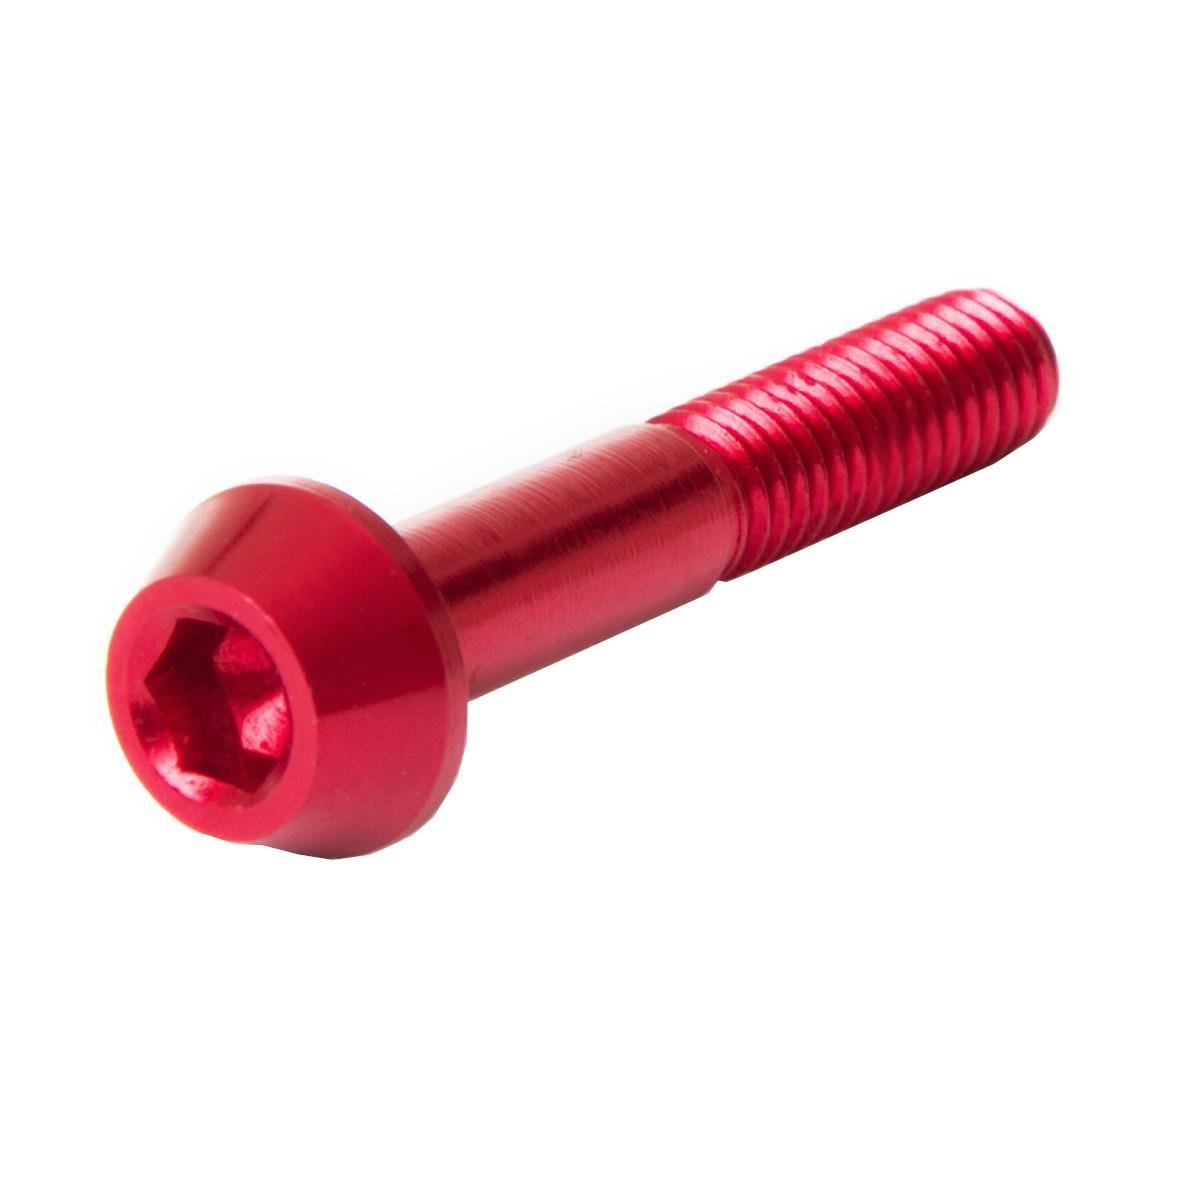 DRC Inner Hex Bolts  M6 x 12 mm, Red, Pack of 20